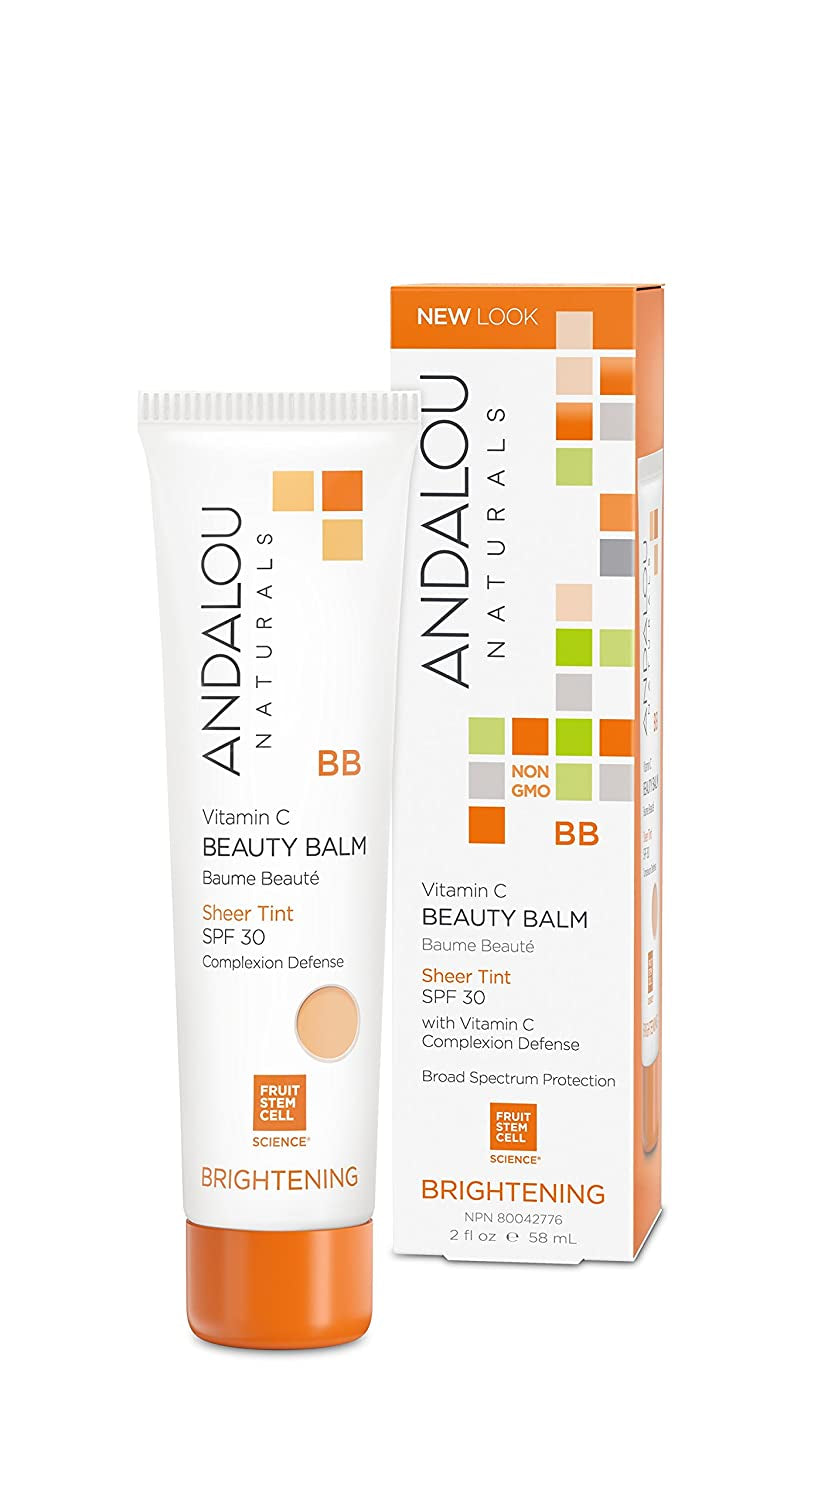 Vitamin C BB Beauty Balm Sheer Tint SPF 30, 2-In-1 BB Cream & Face Sunscreen with Broad Spectrum Protection, Mineral Sunscreen with Non-Nano Zinc Oxide, 2 Fl Oz